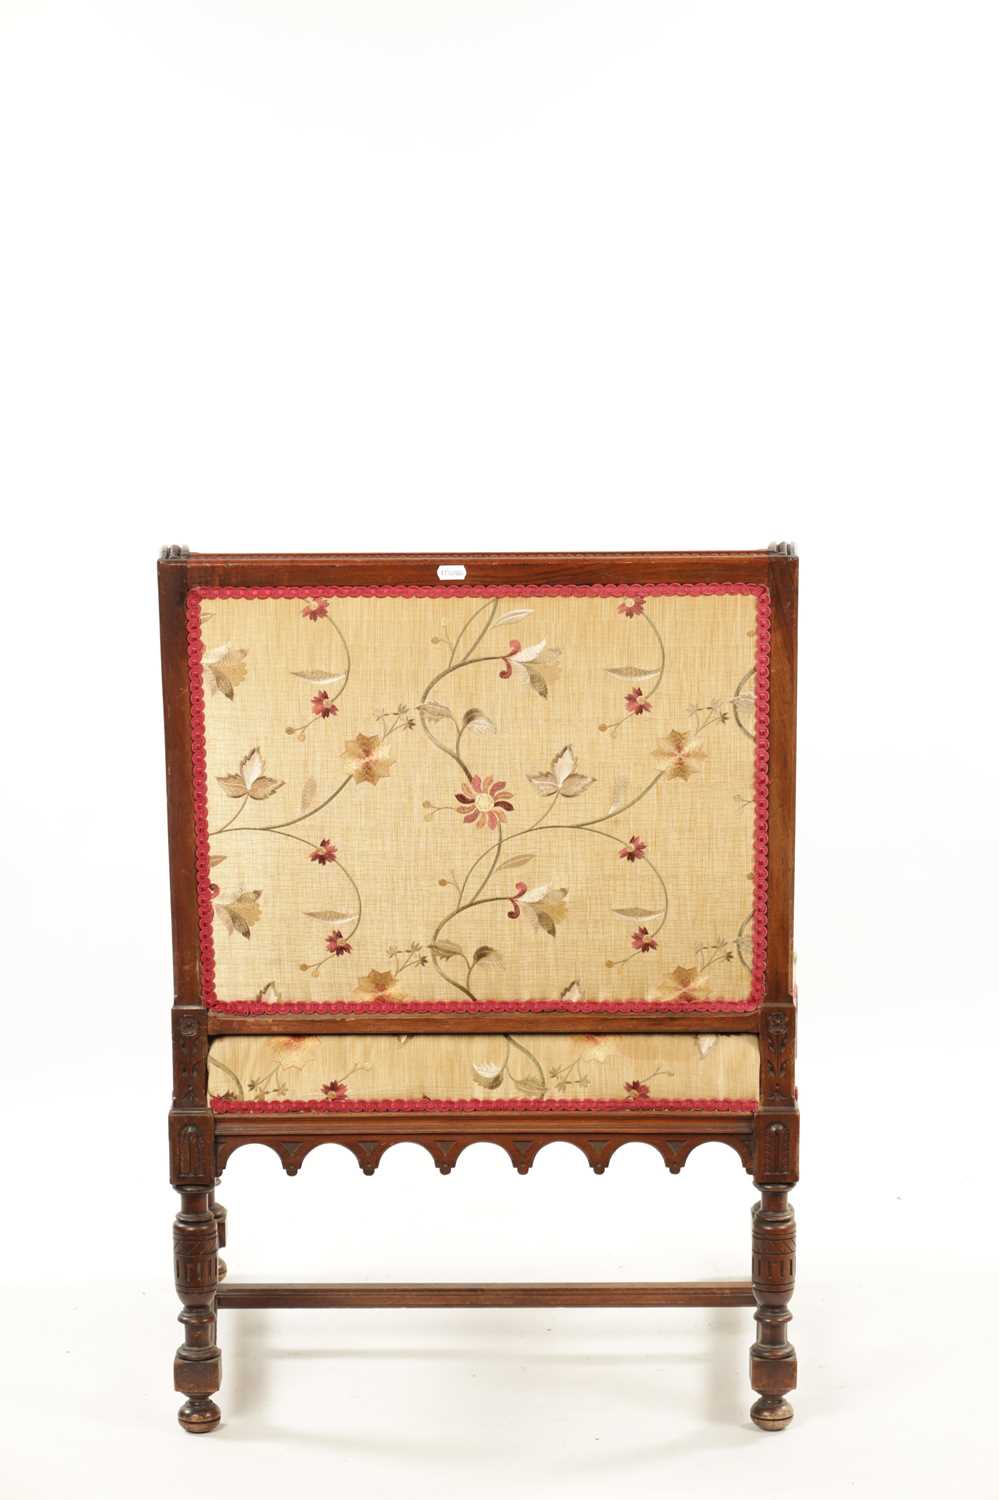 A FINE LATE 19TH CENTURY INLAID WALNUT AESTHETIC PERIOD CHAIR IN THE MANNER WILLIAM MORRIS - Image 7 of 7